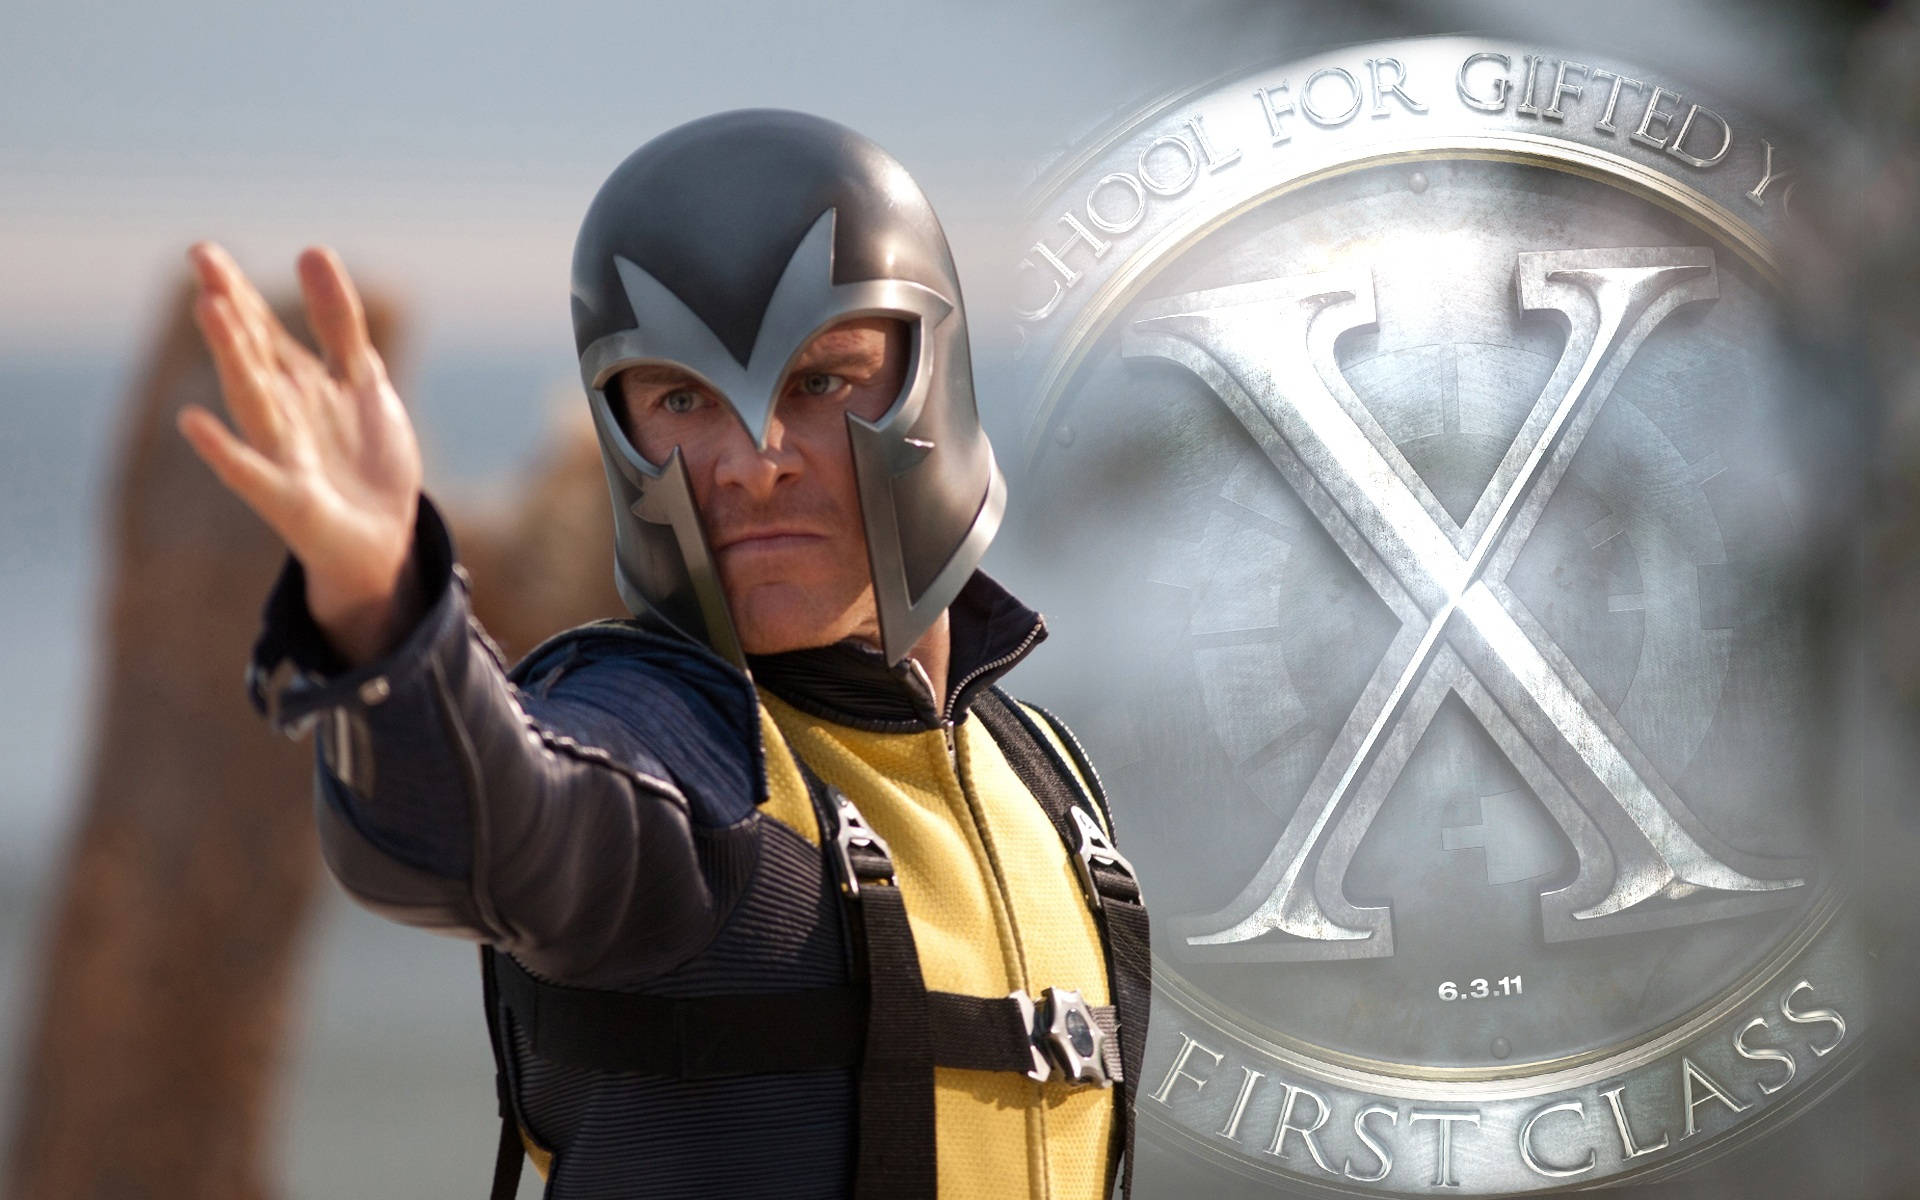 Magneto School For Gifted Wallpaper